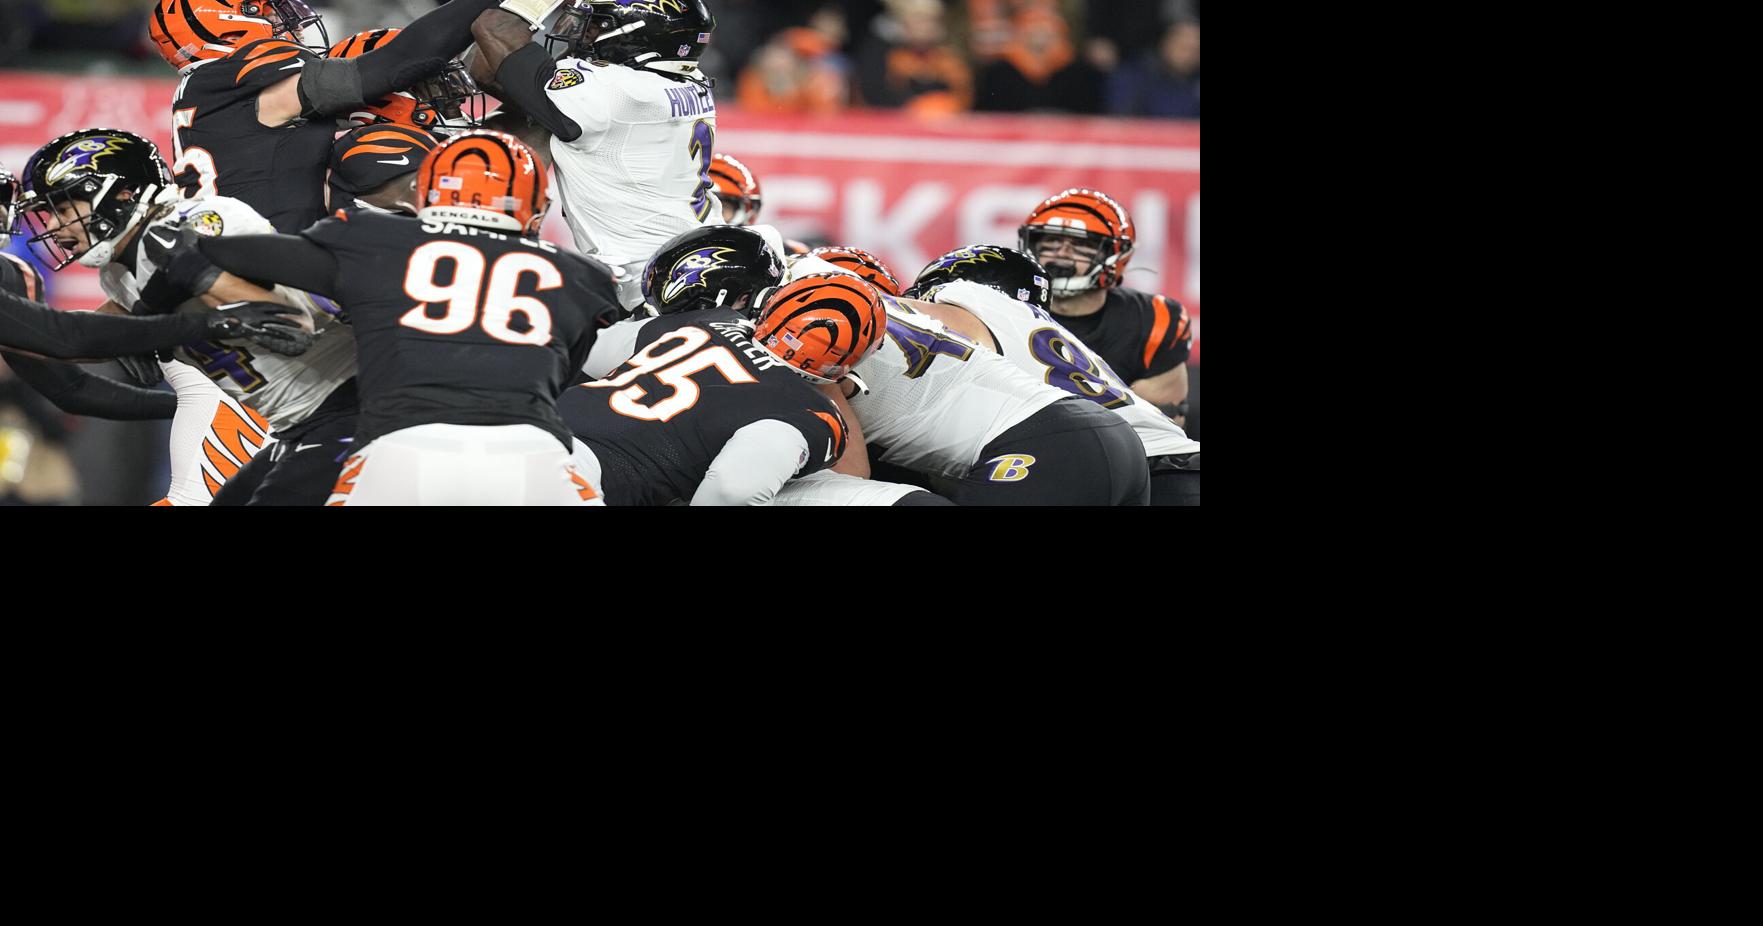 Pokes in the Pros: Wilson's forced fumble helps Bengals win